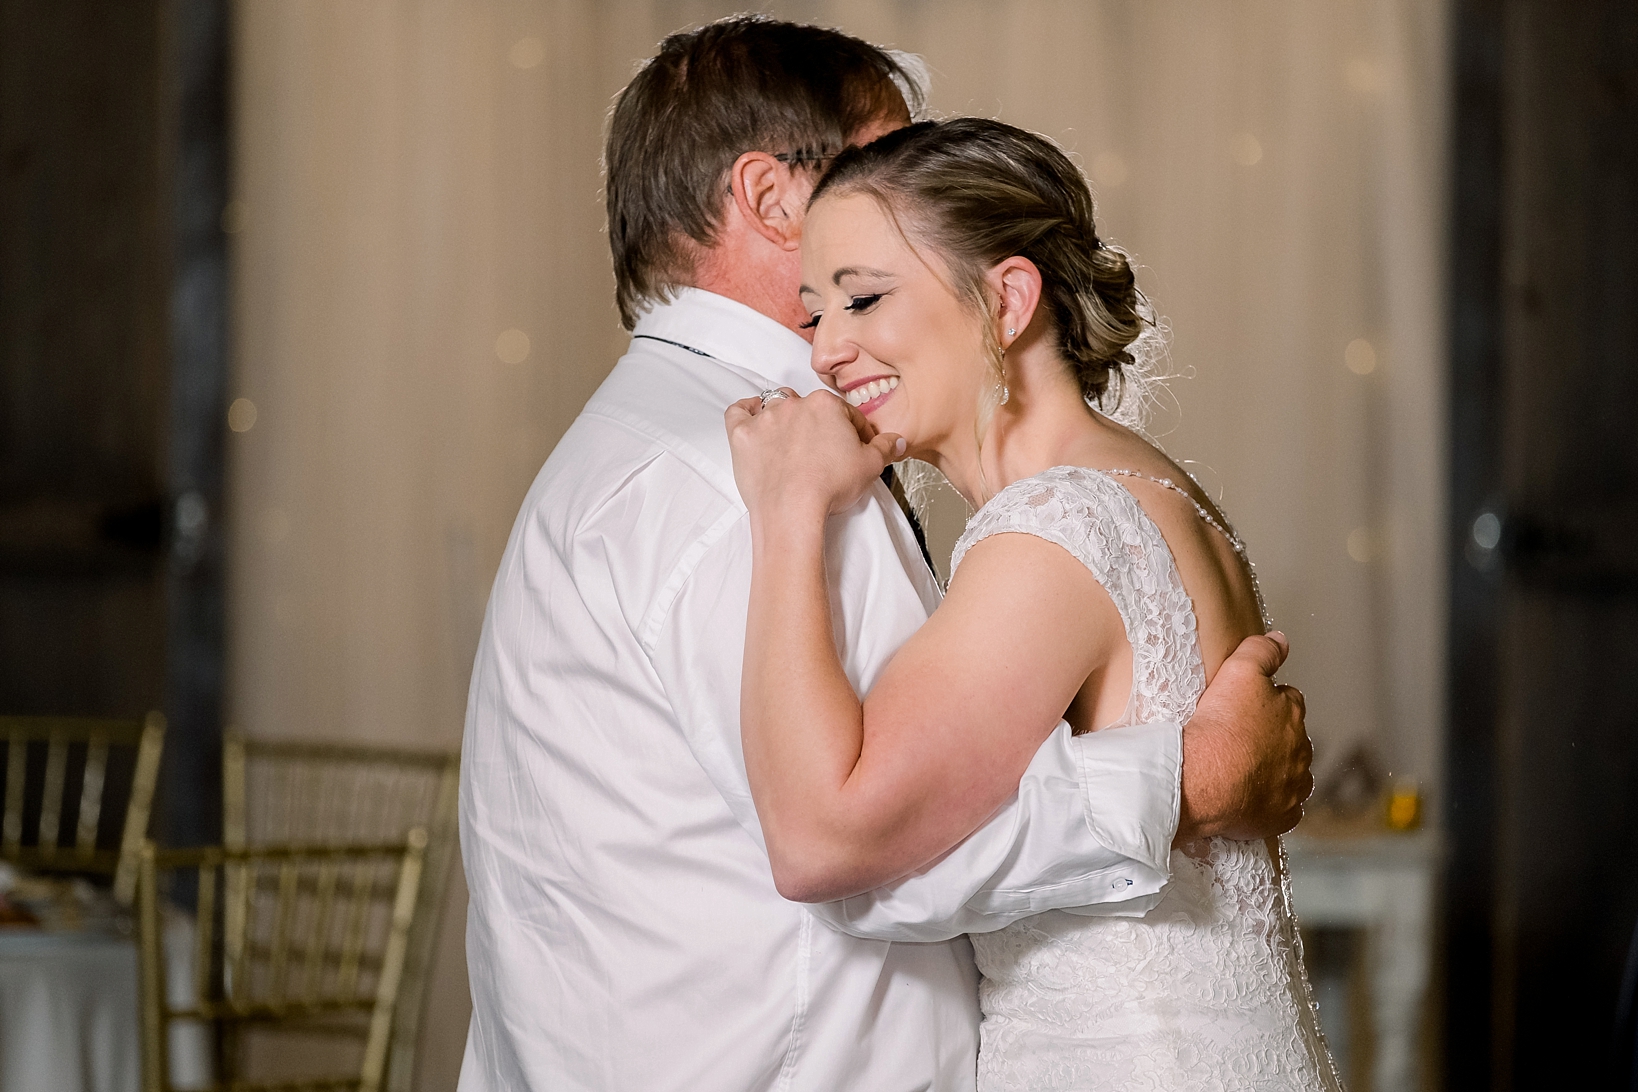 Father and daughter share a laugh during their dance during the wedding reception